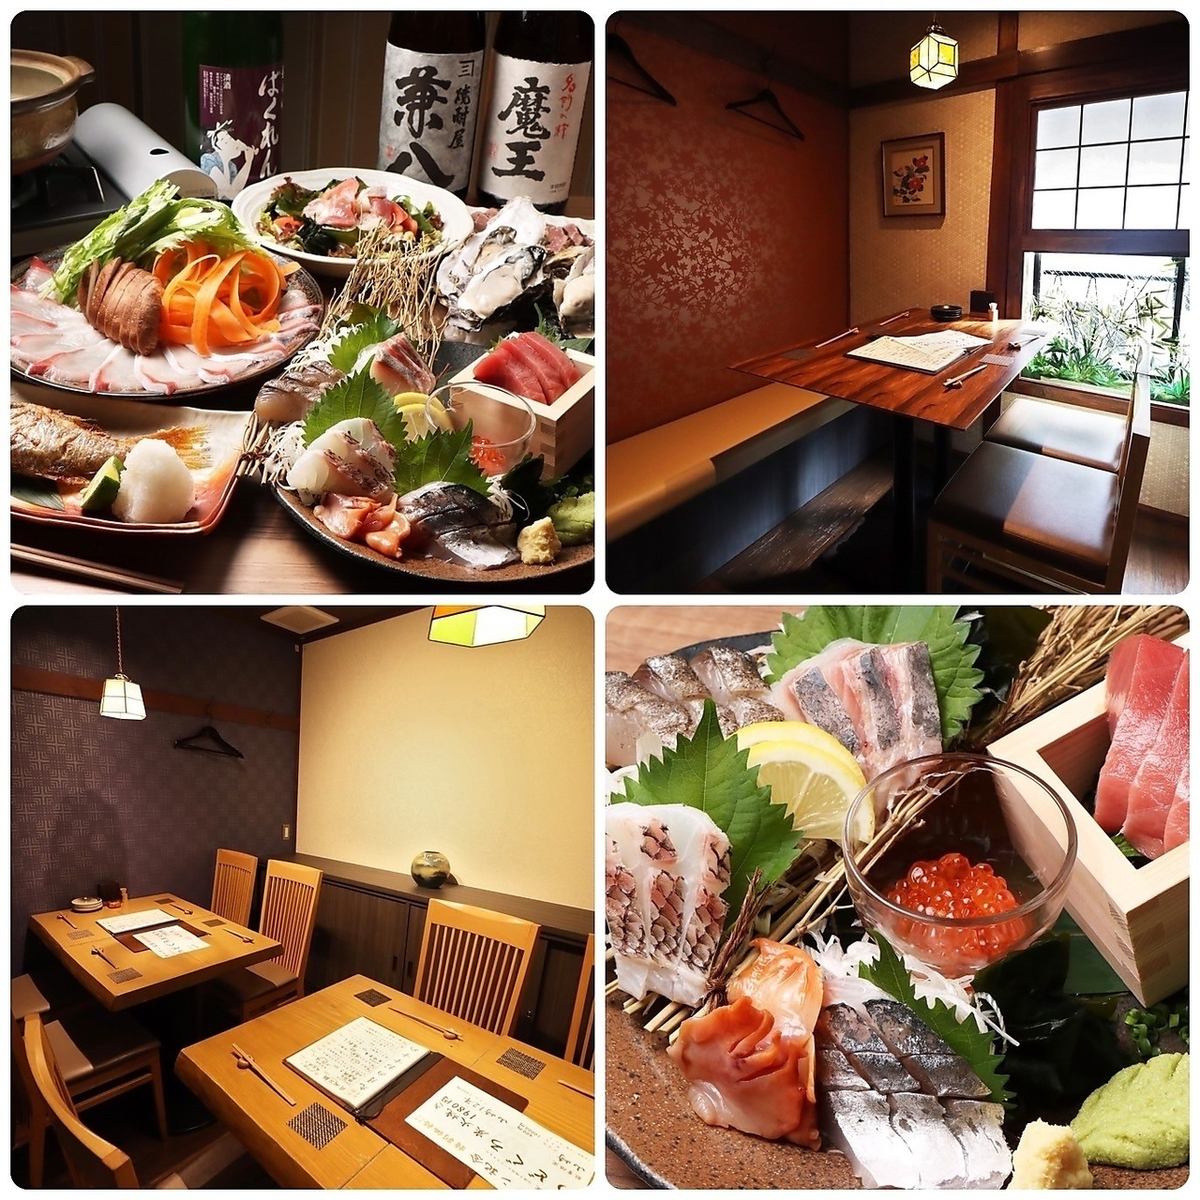 Enjoy exquisite seafood and sake in a calm space♪